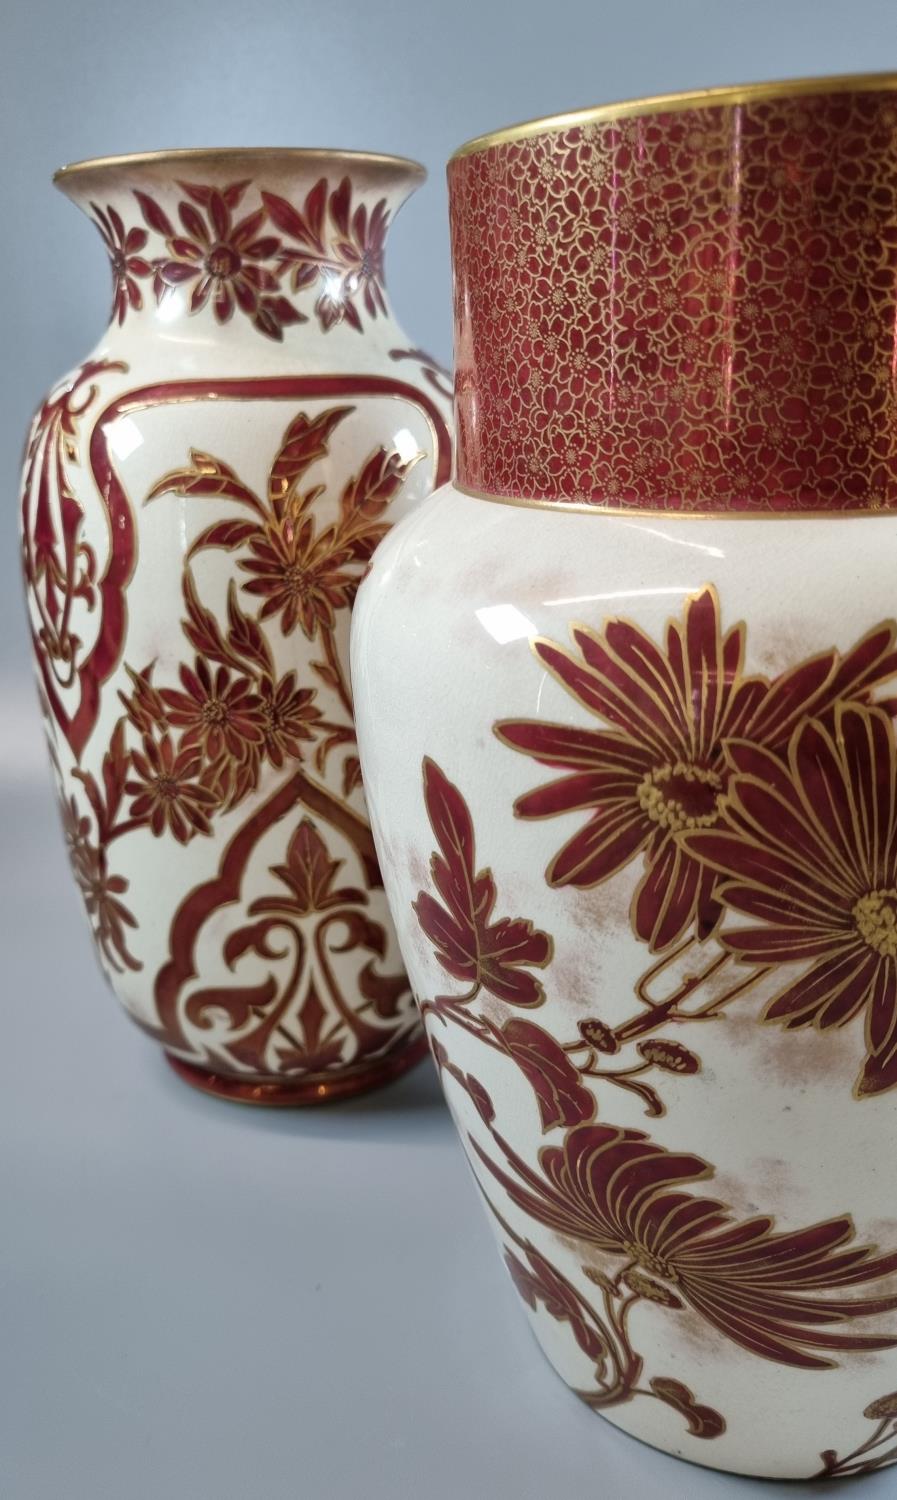 Pair of late 19th early 20th century Doulton Burslem Art Ware vases of baluster form on a cream - Image 2 of 3